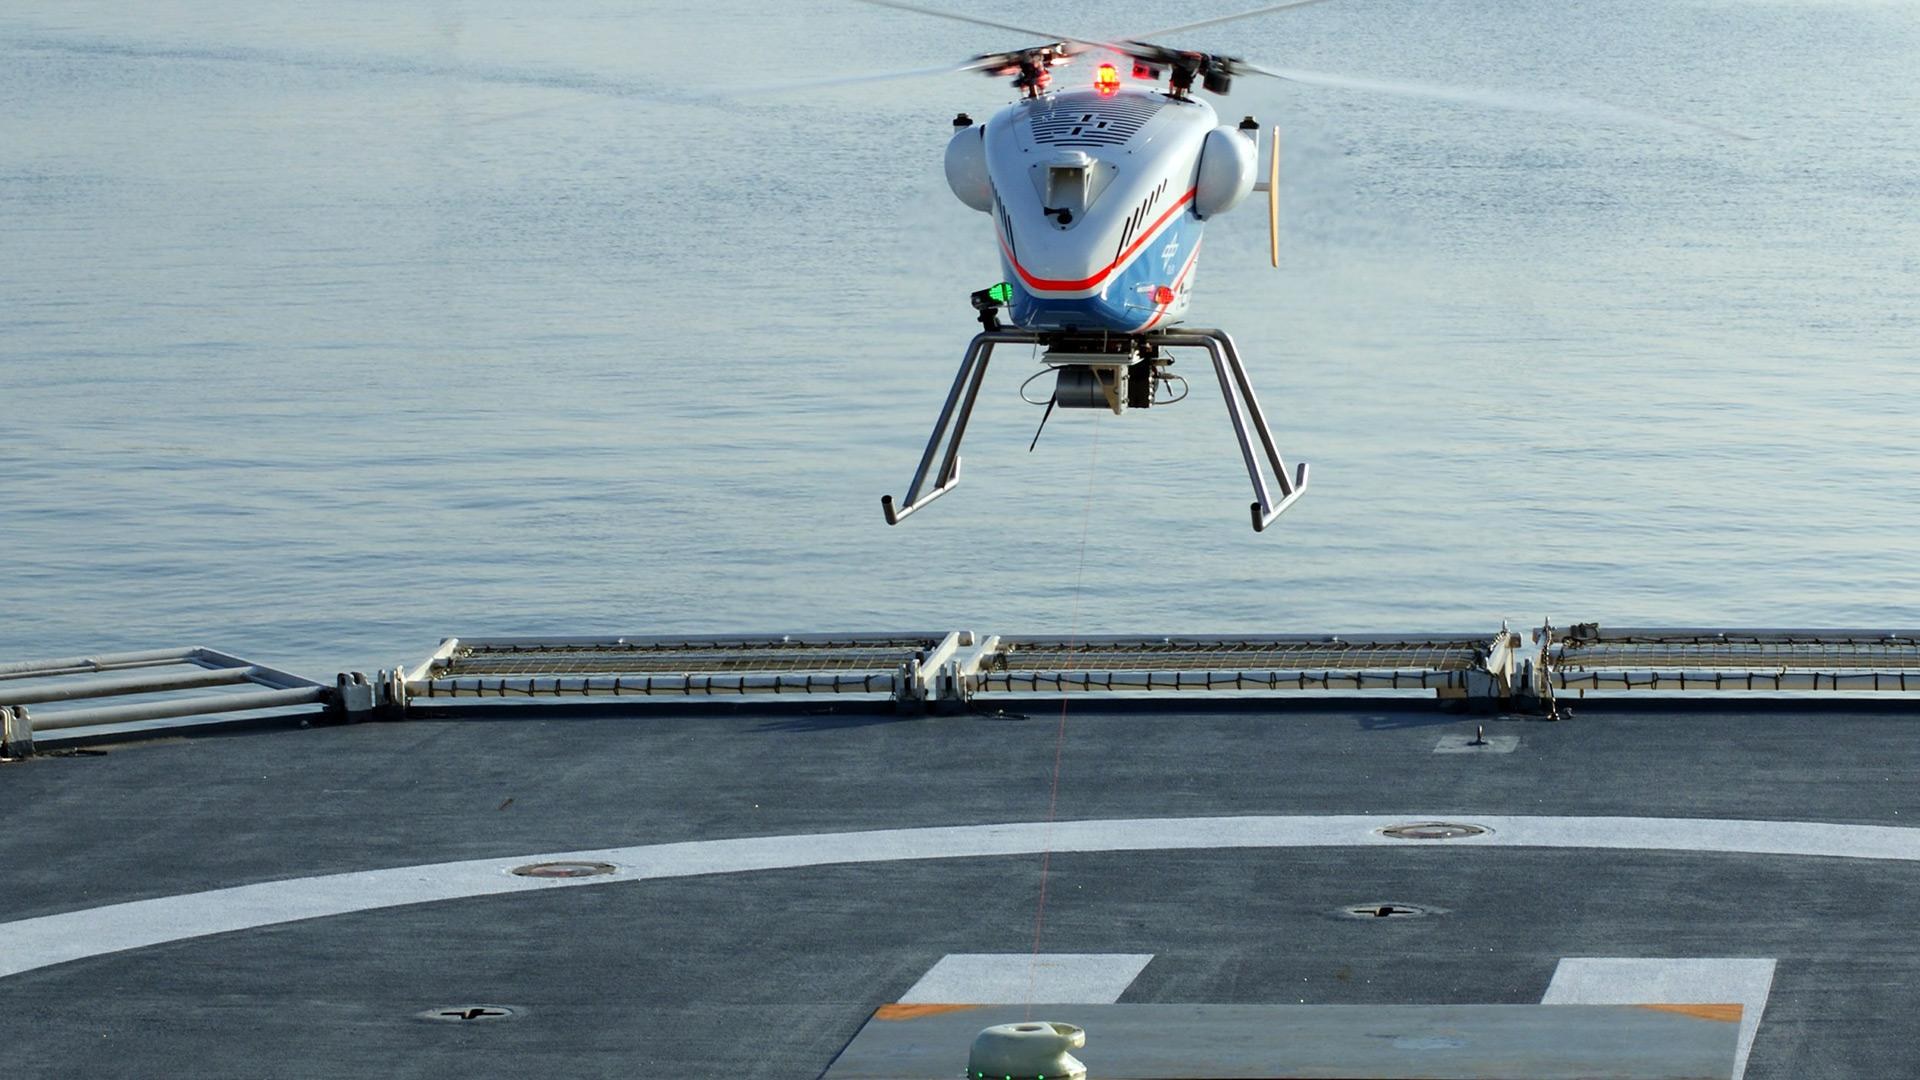 MaRPAS – Maritime Remotely Piloted Aircraft System